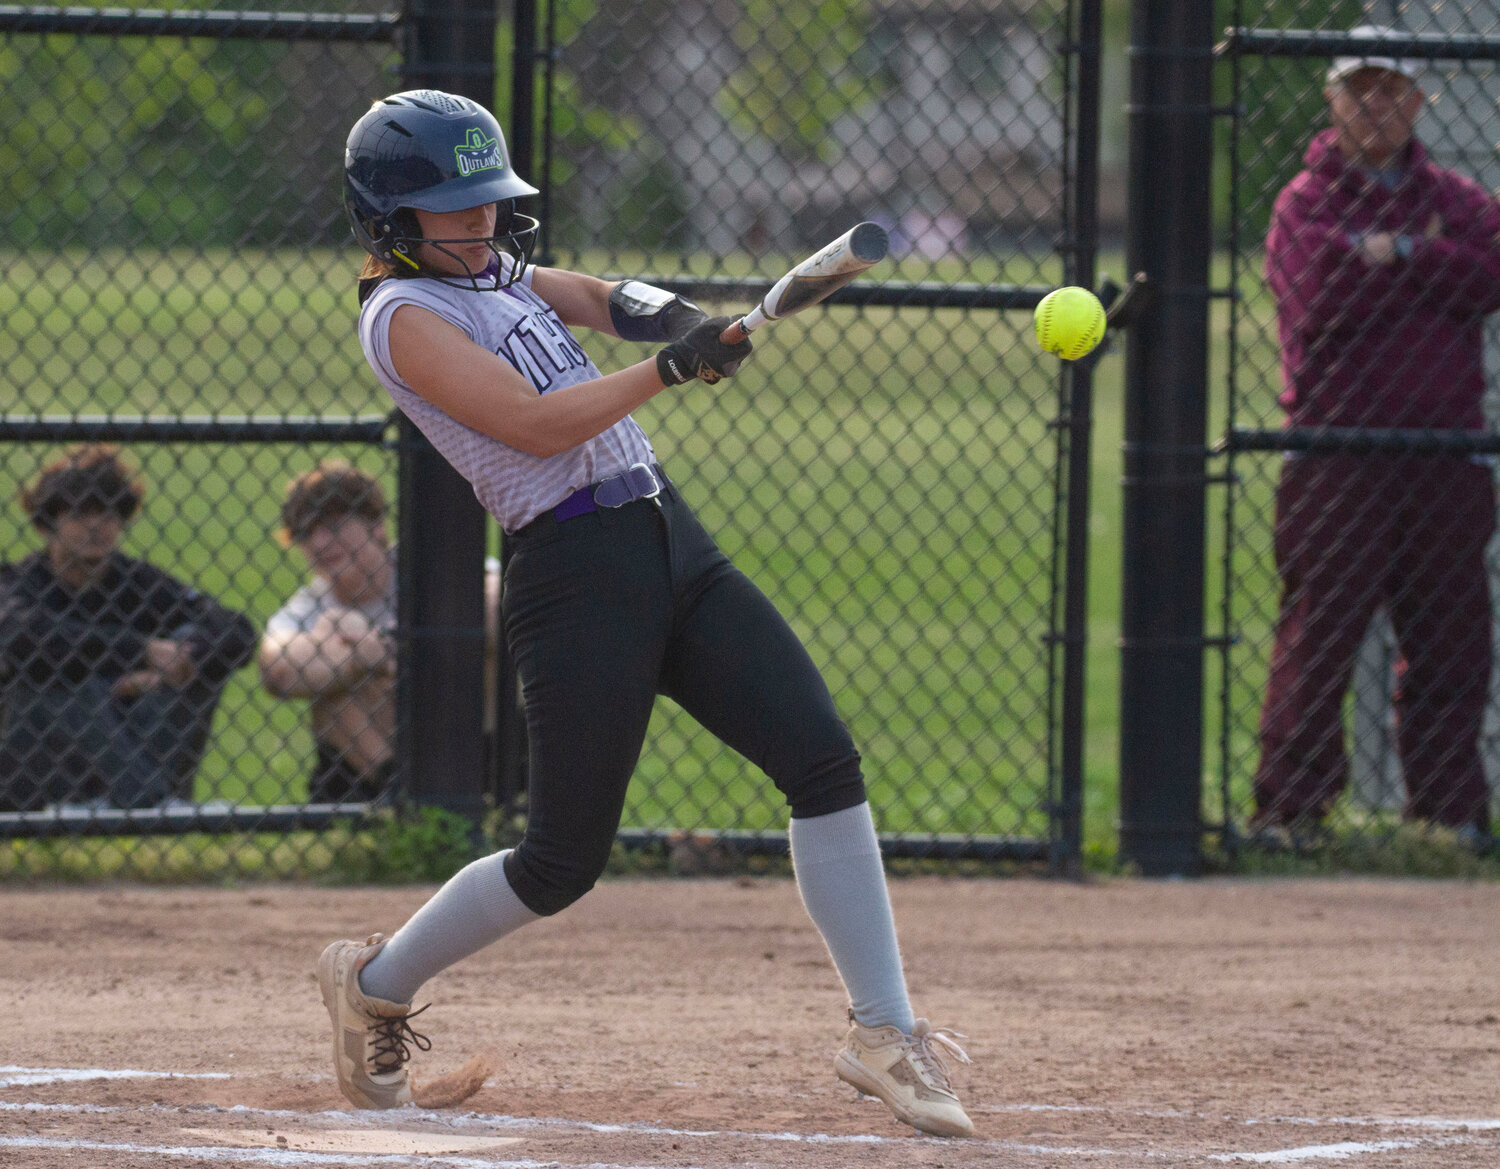 Julie Allen belts a double in the fourth inning.